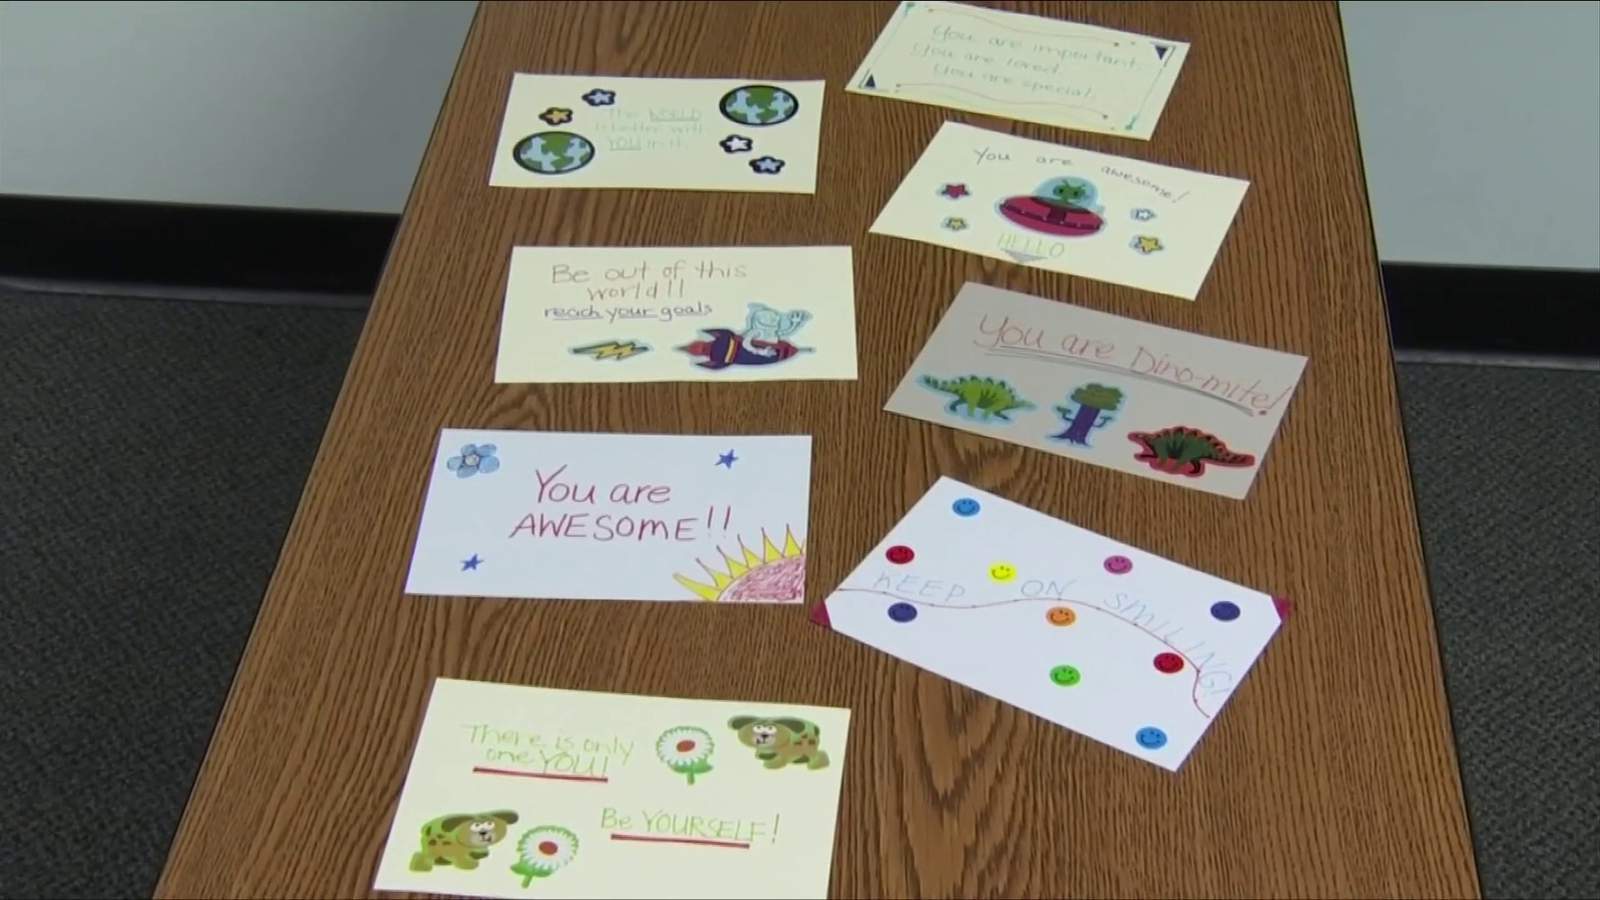 Write a card to spread kindness to a child in Roanoke Valley